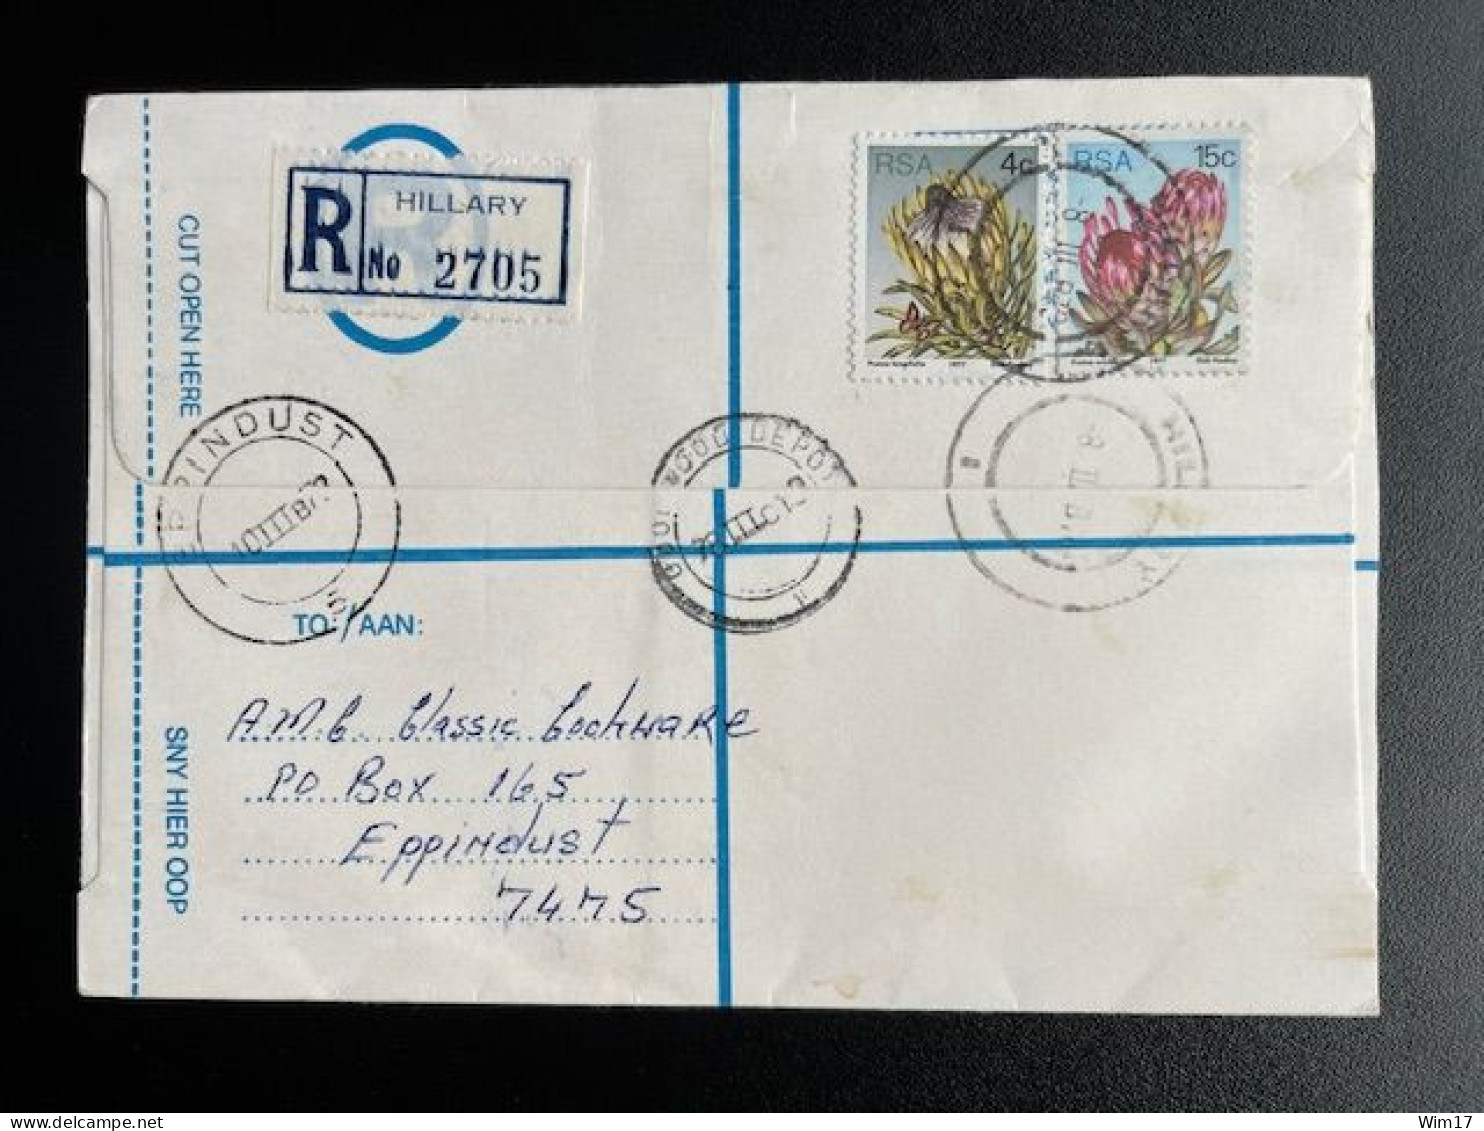 SOUTH AFRICA RSA 1978 REGISTERED LETTER HILLARY TO EPPINDUST CAPE TOWN 08-03-1978 ZUID AFRIKA - Storia Postale